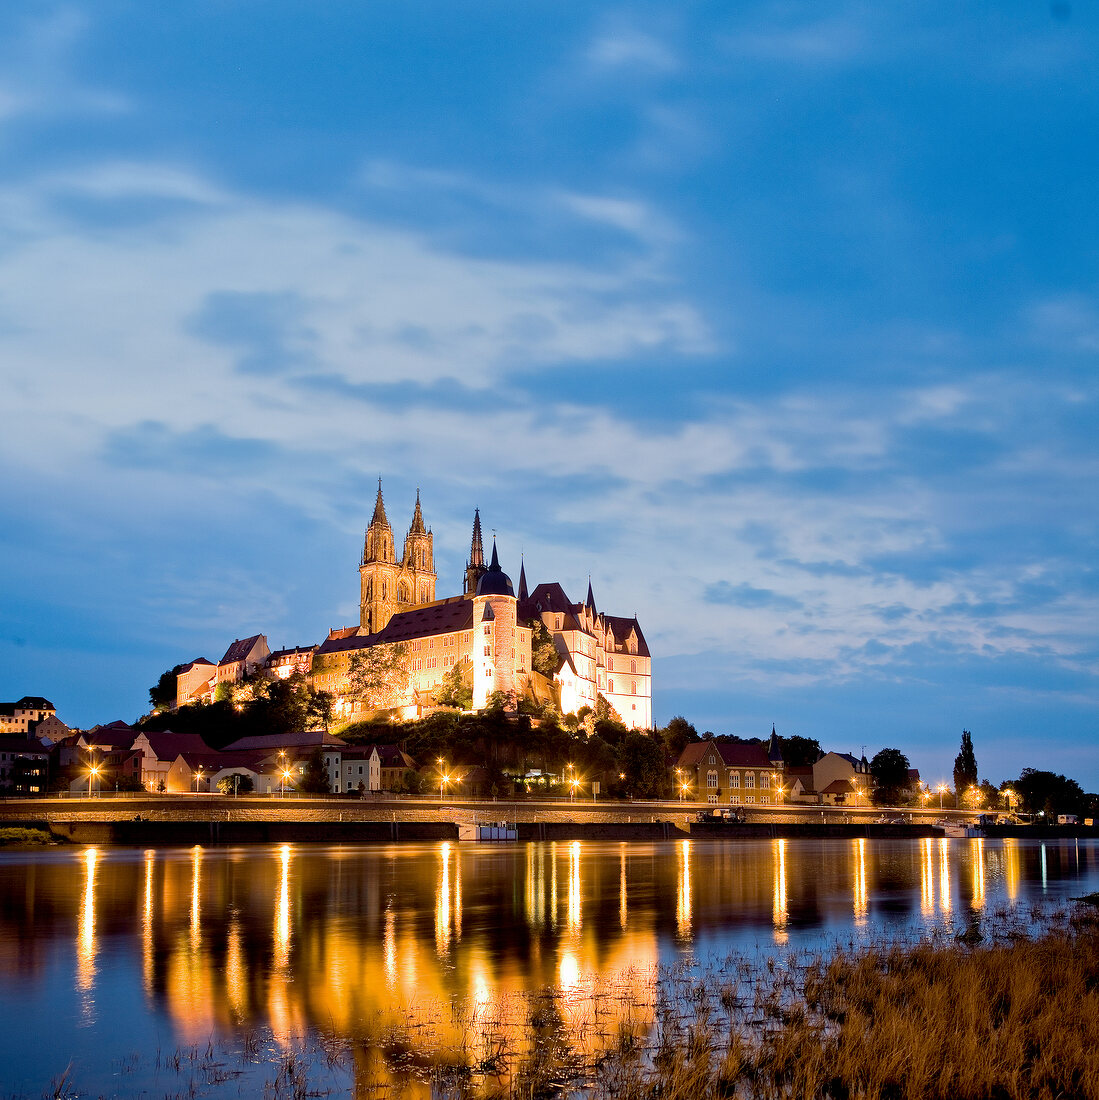 Albrechtsburg and Meissen Cathedral on Elbe river in Saxony, Germany